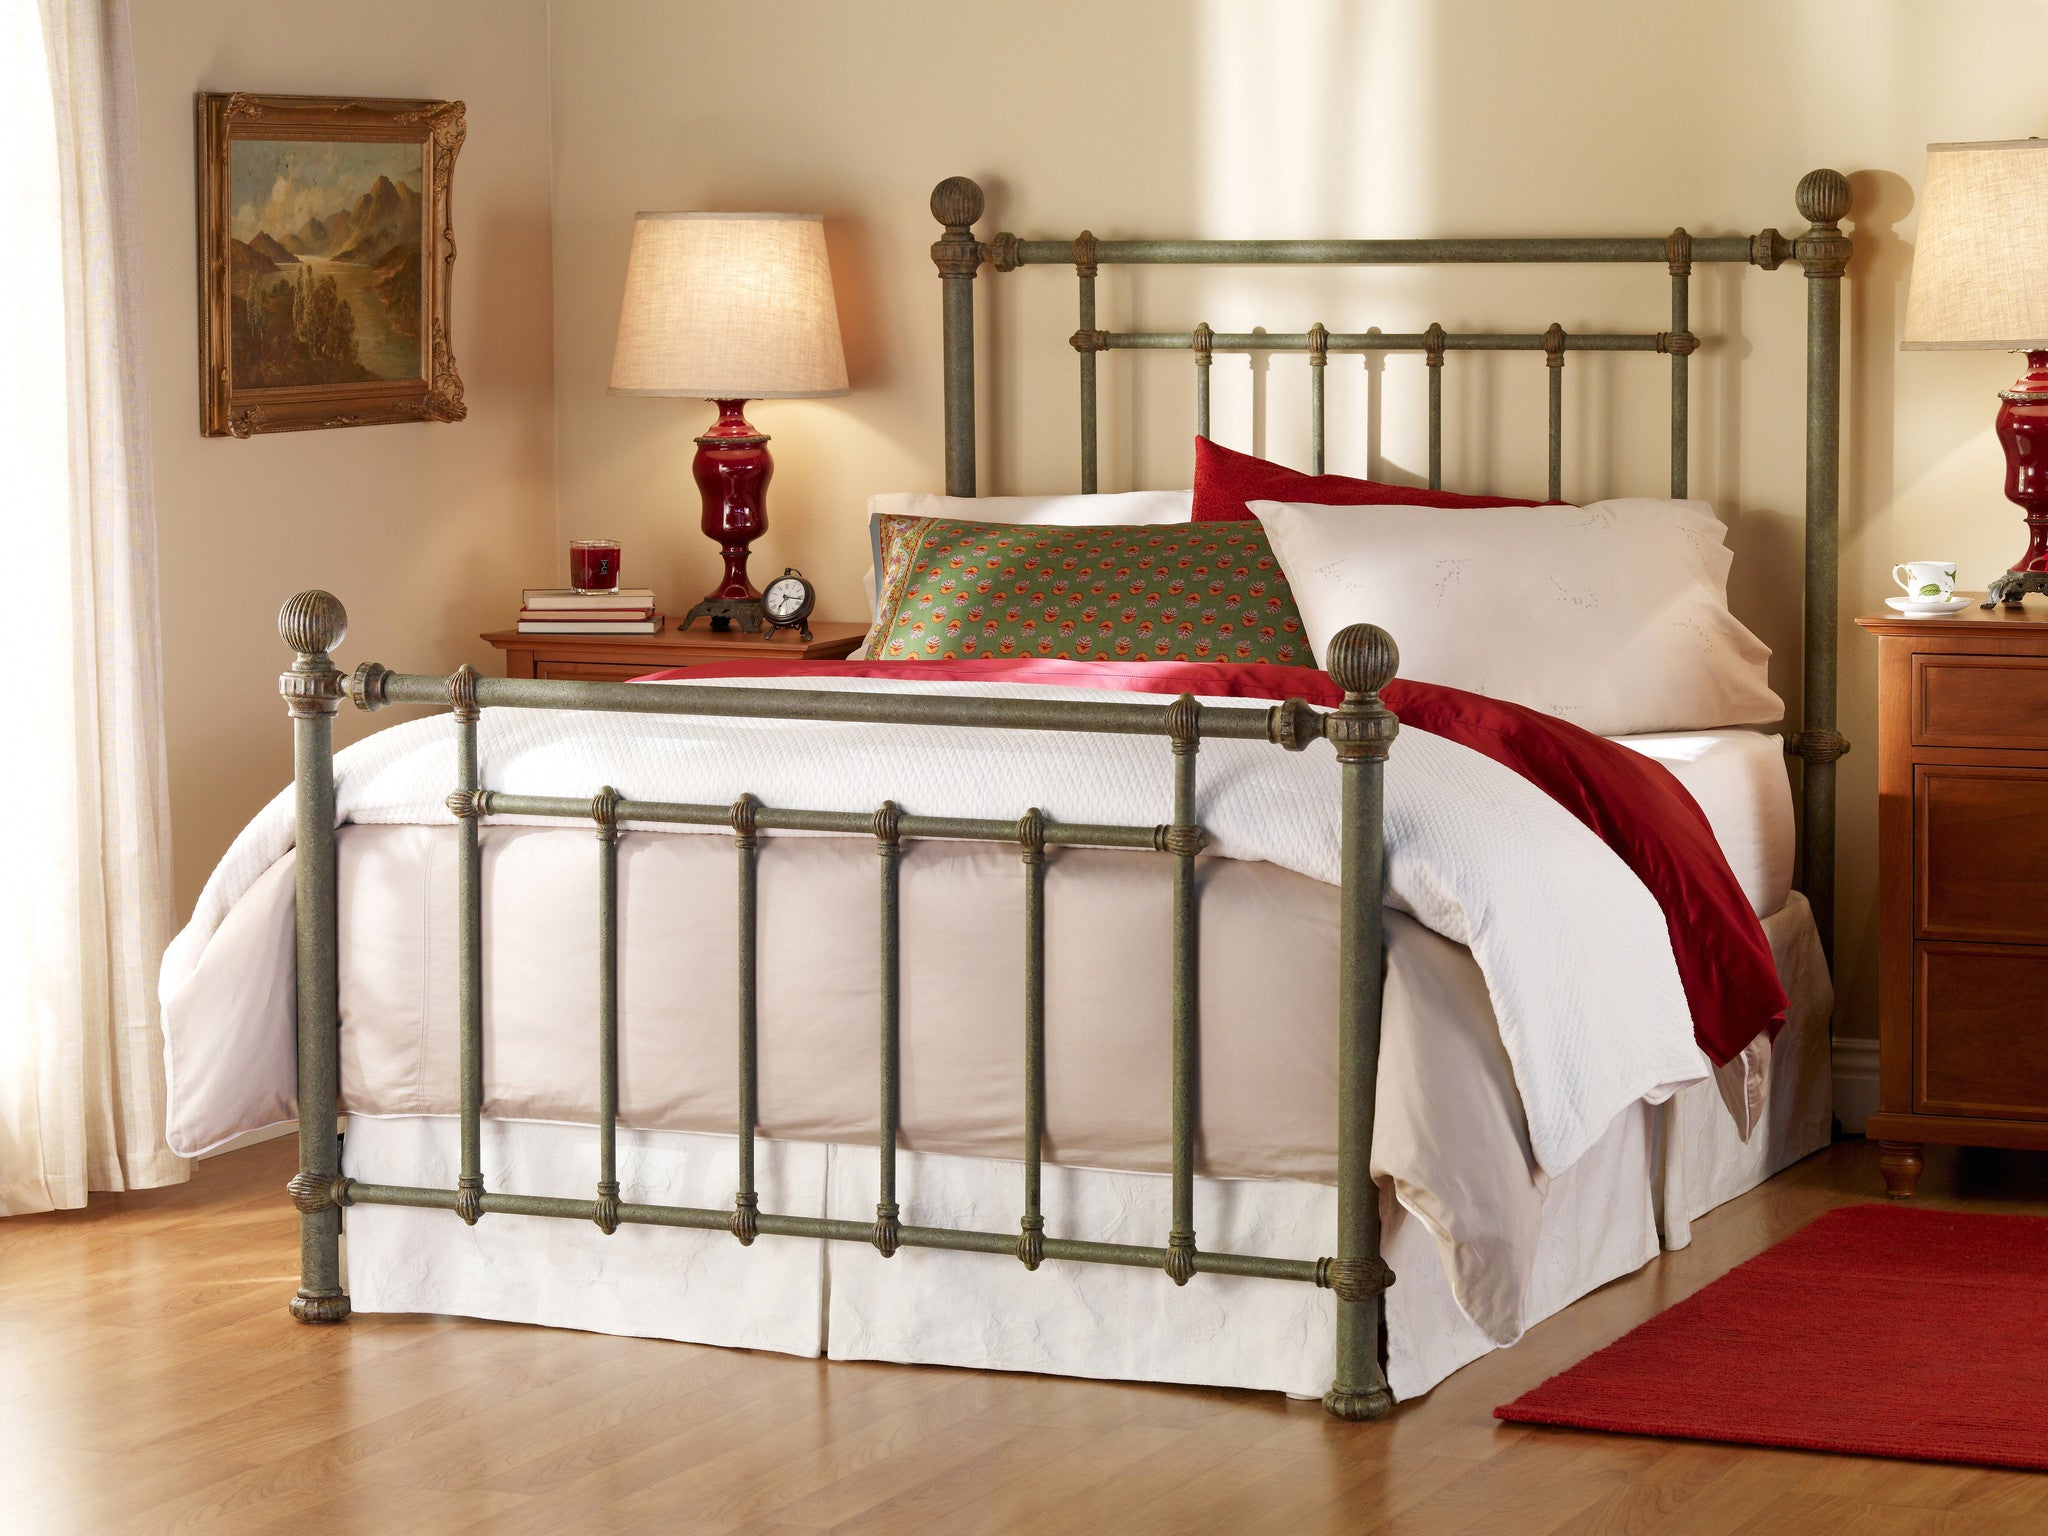 WESLEY ALLEN REVERE IRON BED - Luxurious Beds and Linens